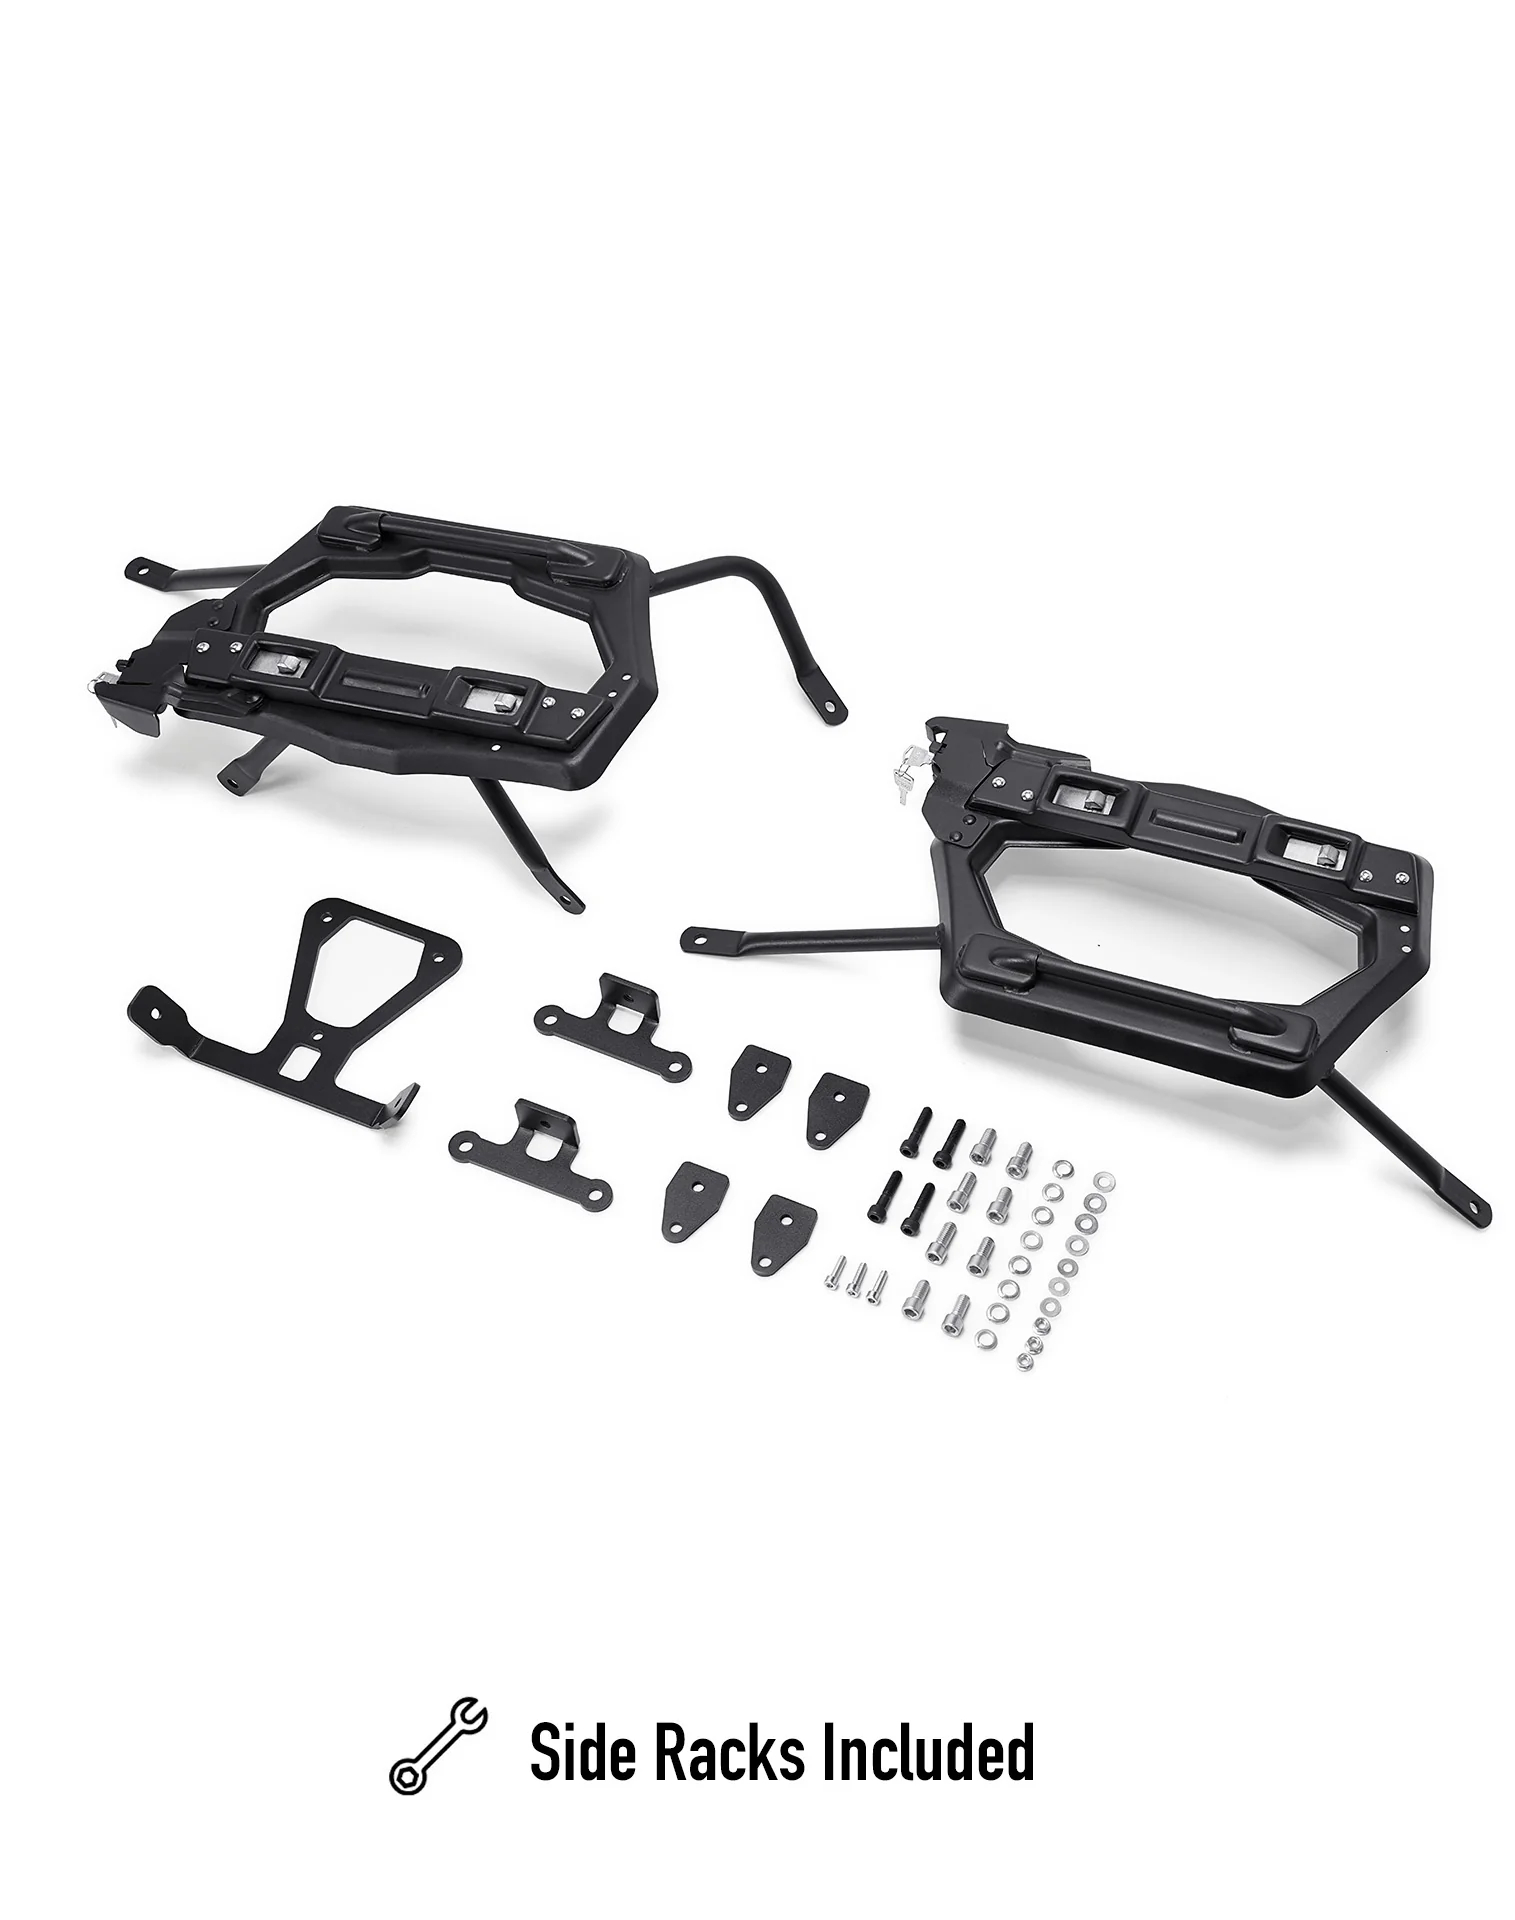 Viking Apex XL BMW R 1200 GS Aluminum Side Cases Black Hardware Included